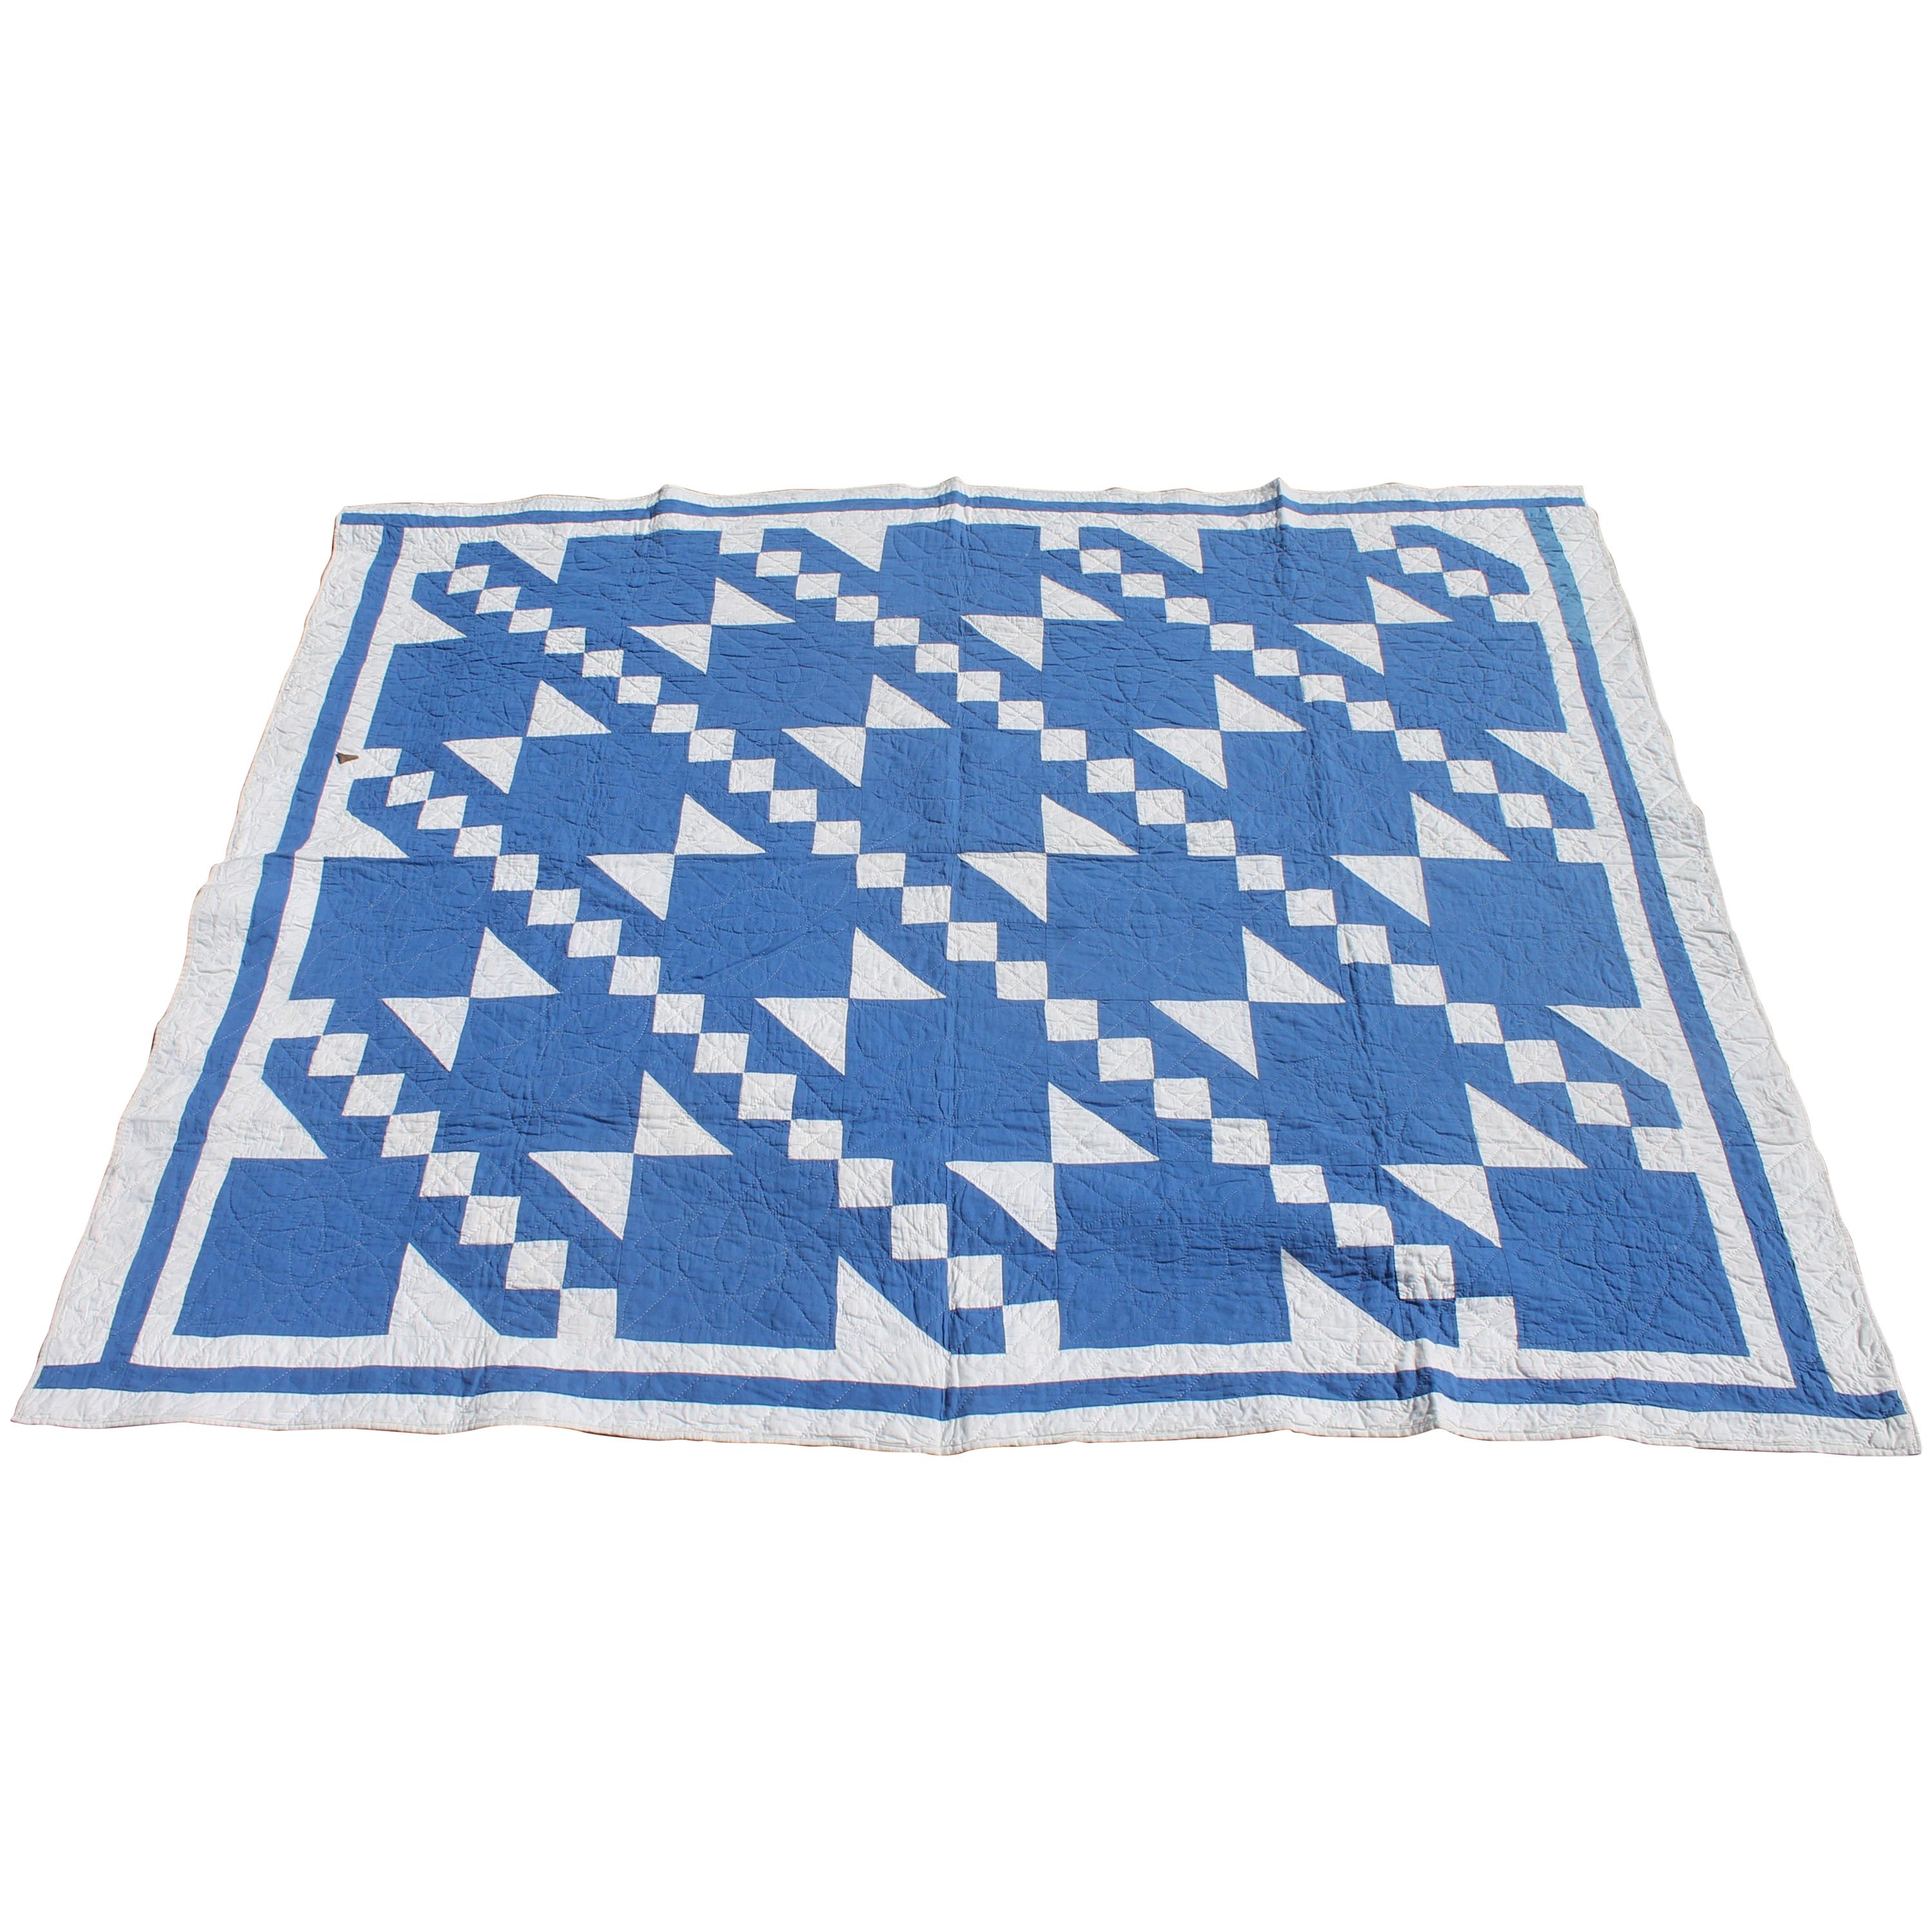 Antique Quilt-French Blue and White Geometric Quilt